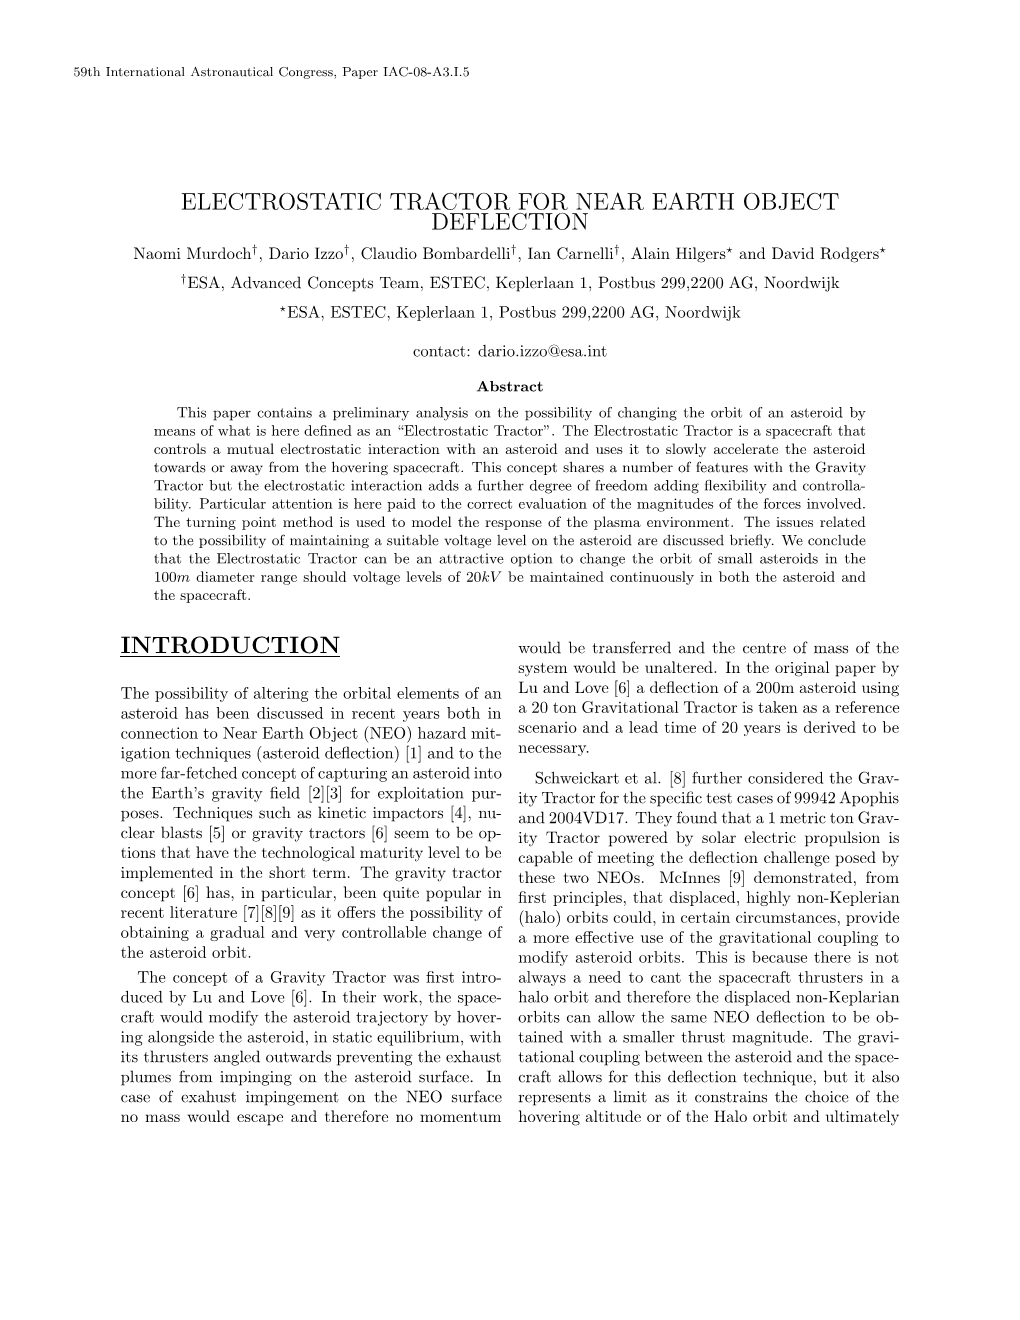 Electrostatic Tractor for Near Earth Object